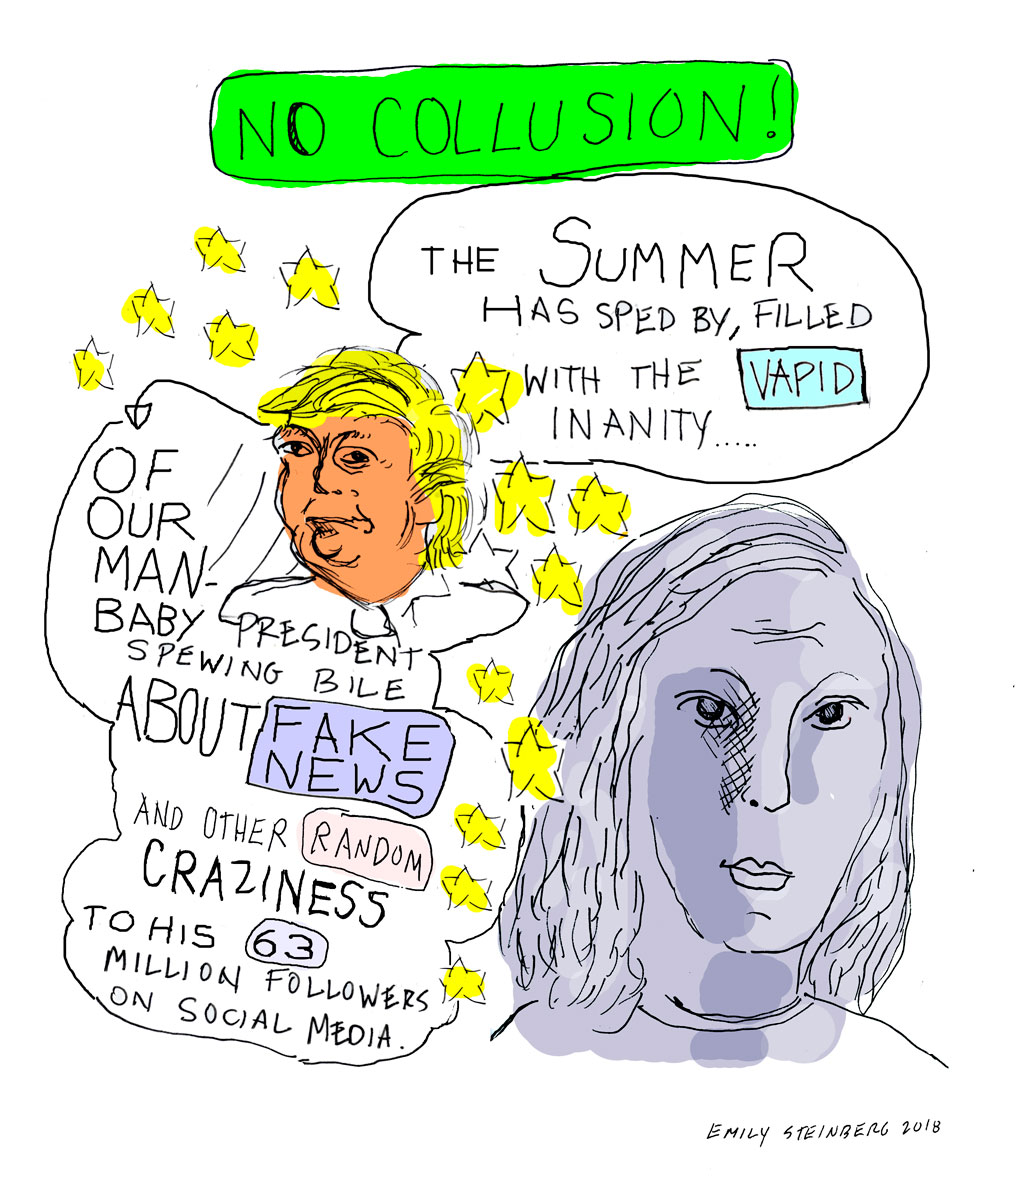 NO COLLUSION! by Emily Steinberg - Title